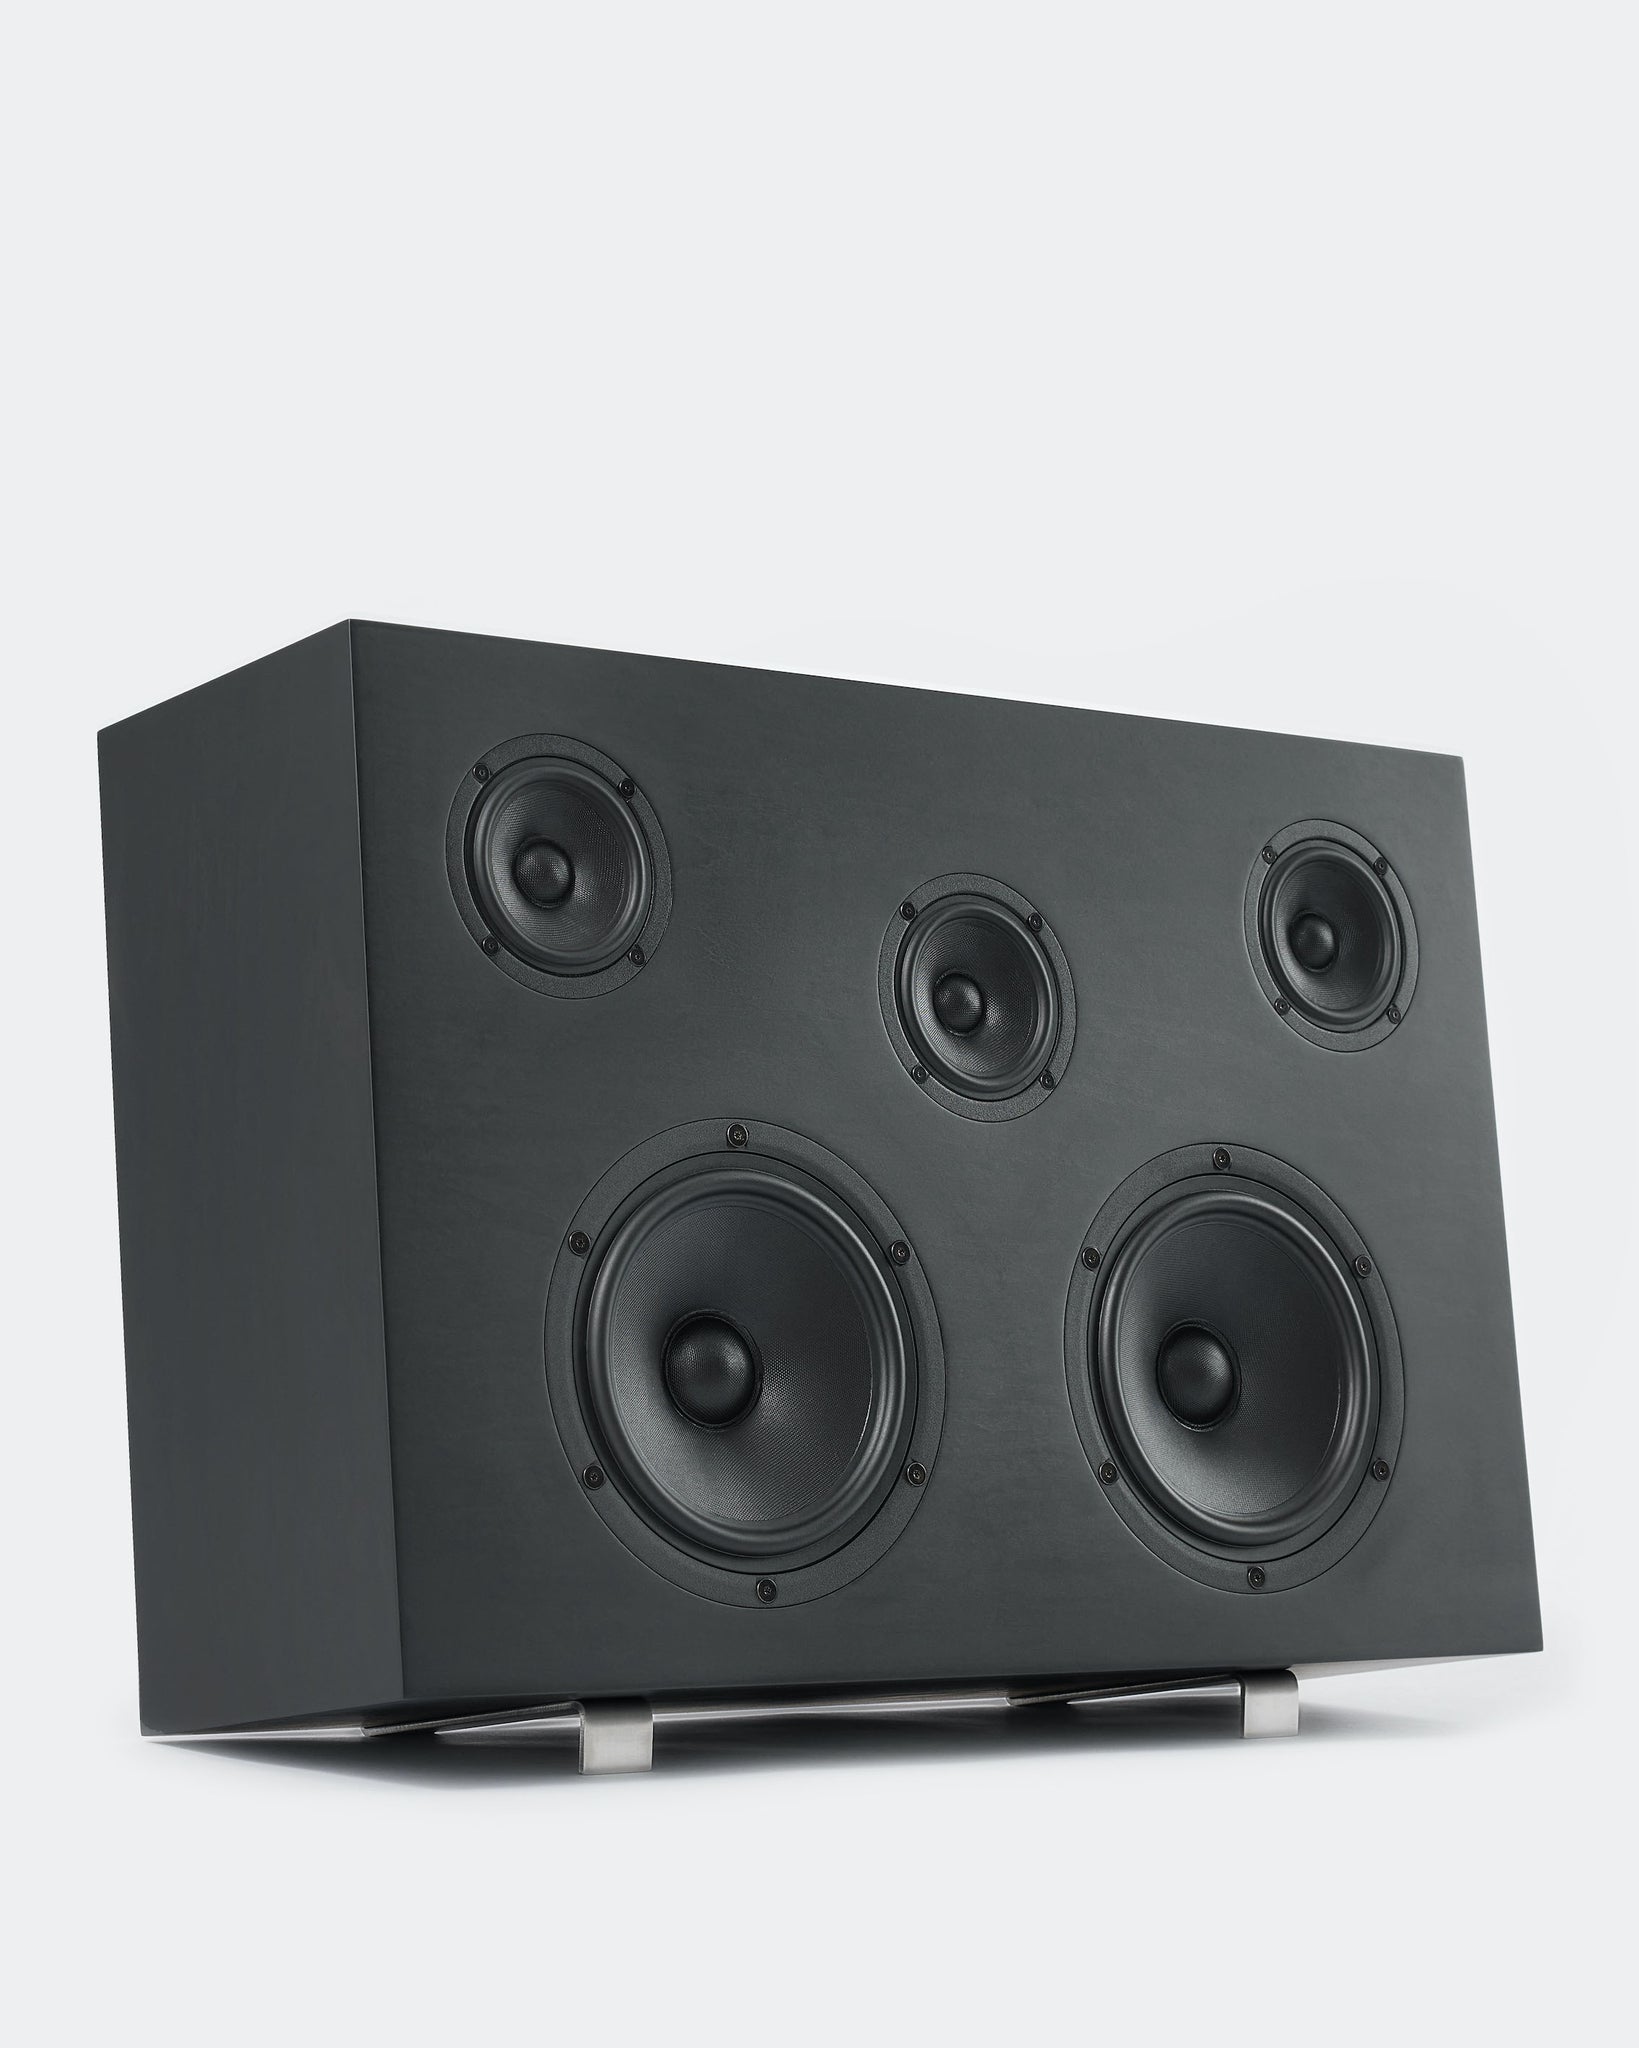 What does a 15 USD BT speaker look like (RP Minis Mini Subwoofer)